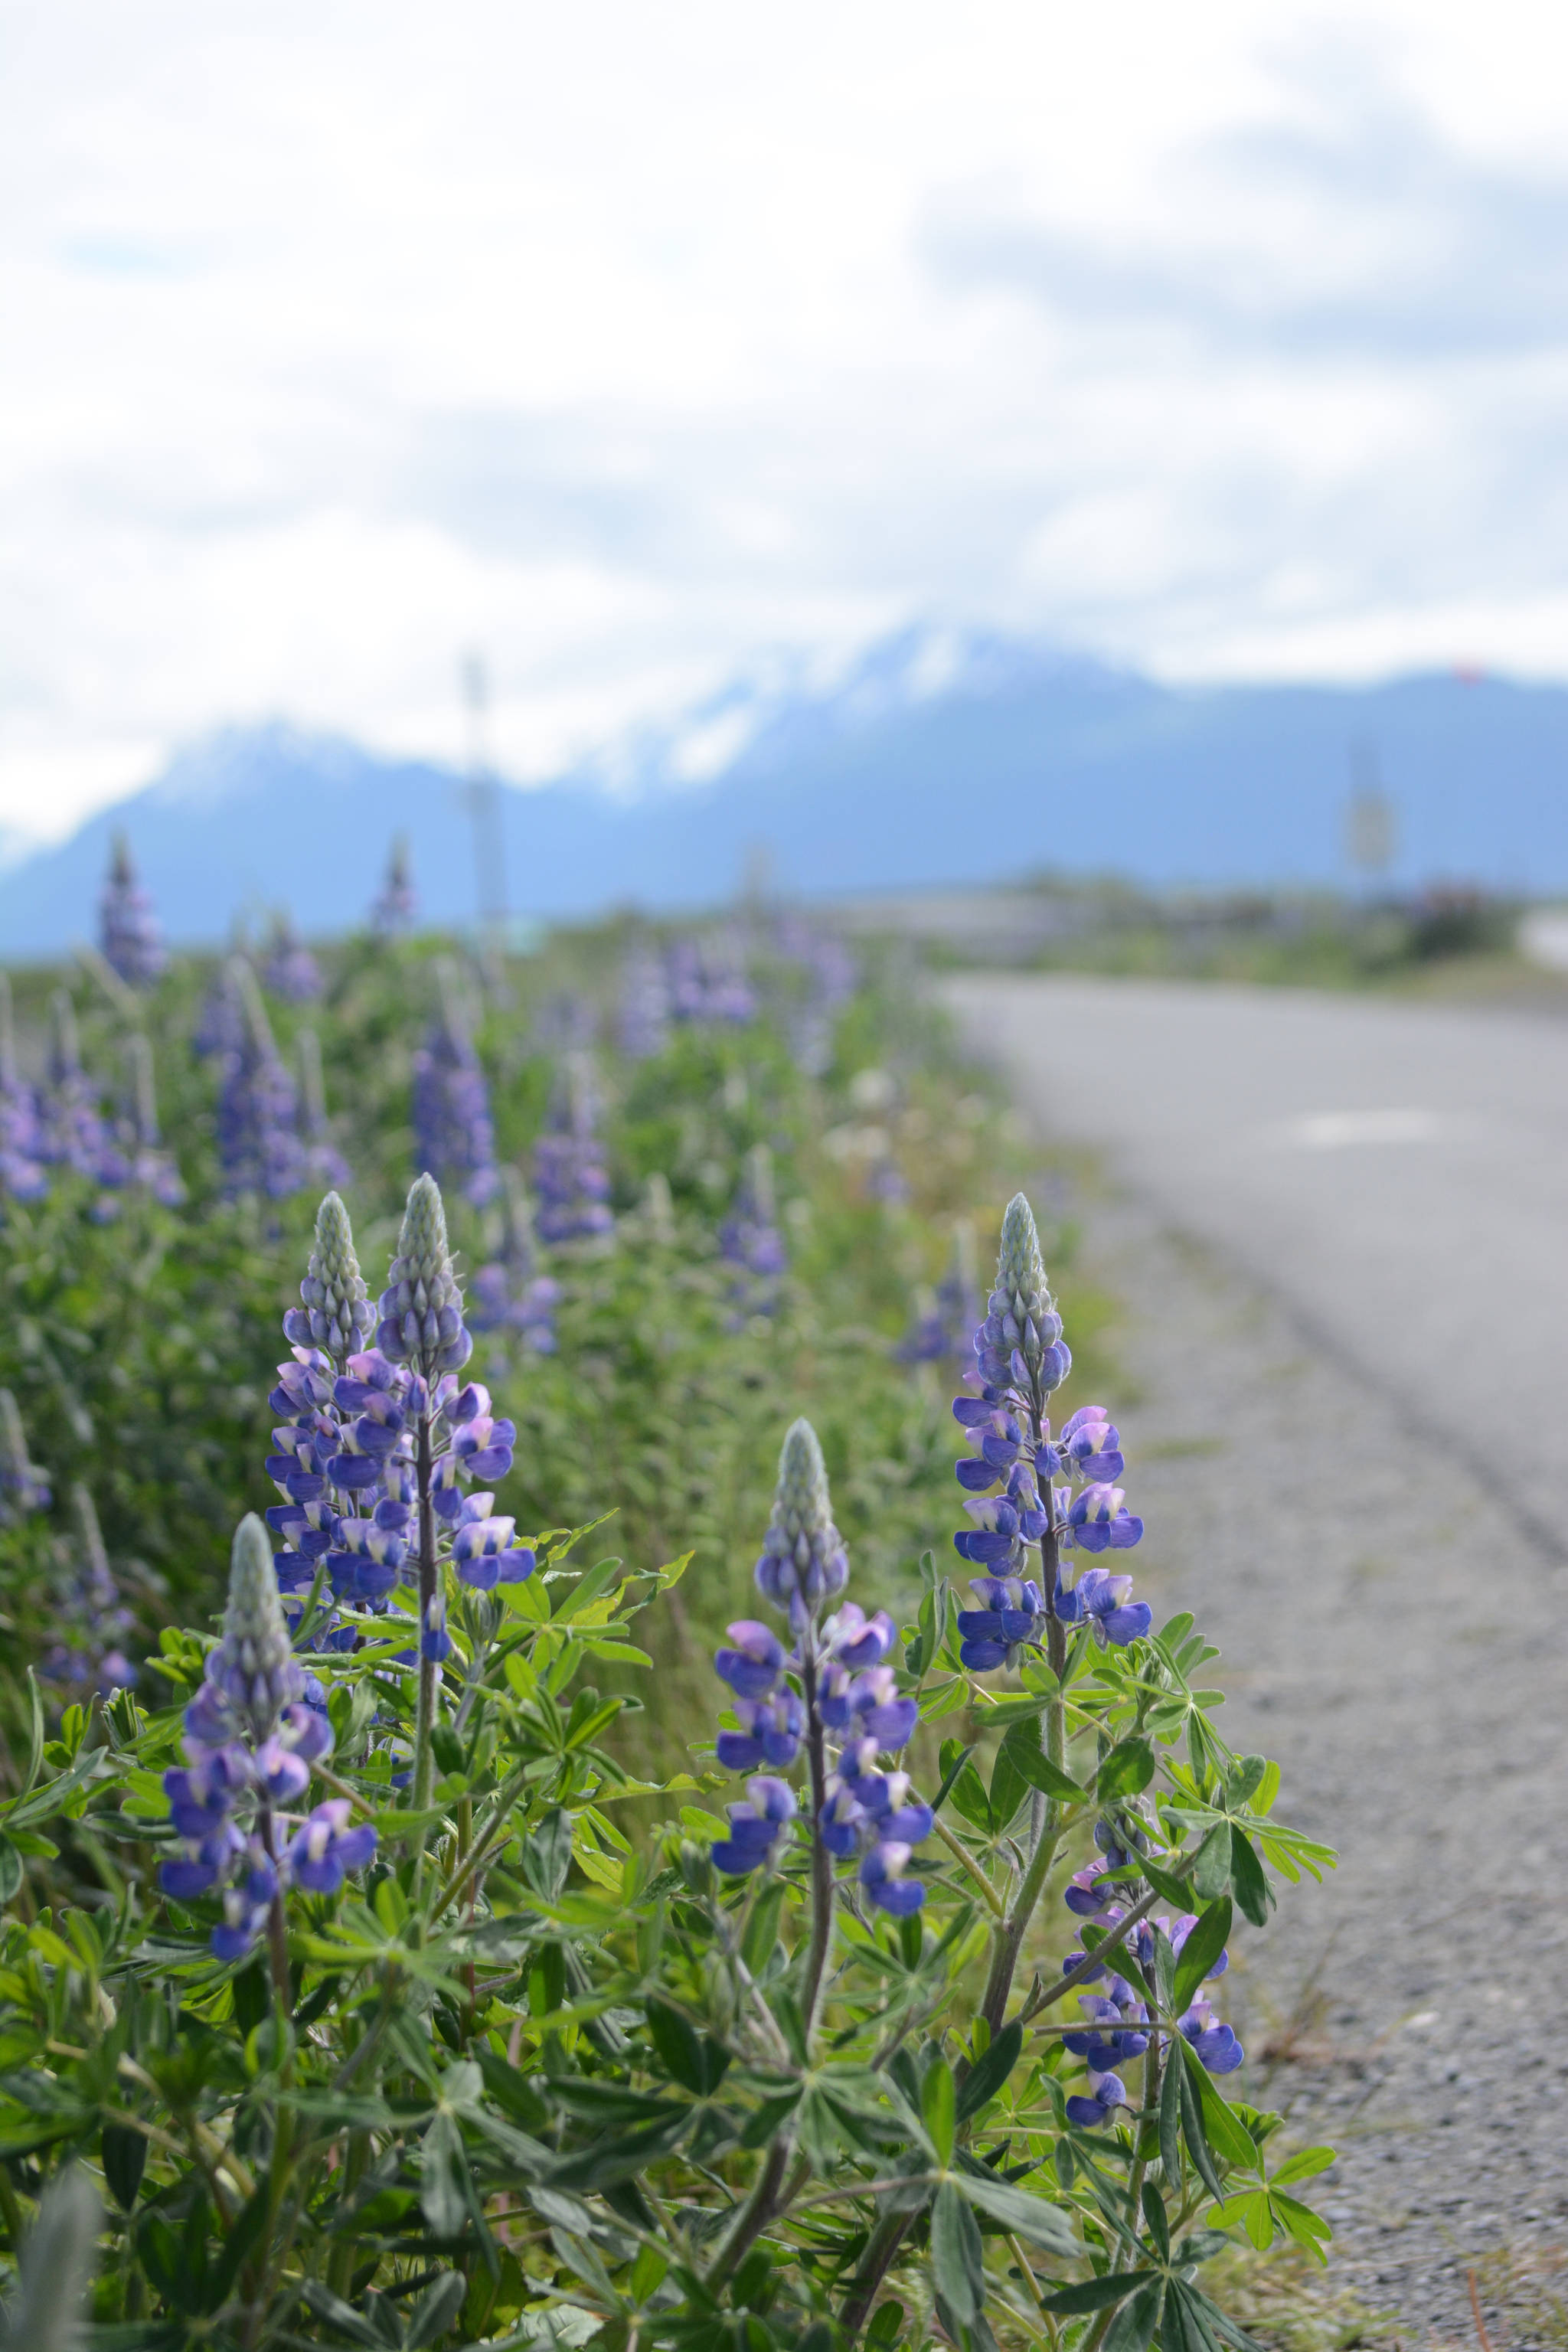 Lupines bloom along the Homer Spit Trail on Tuesday, June 19. Lupines usually bloom in late June on the Spit, bringing a burst of color to the trail running from Kachemak Drive to Coal Point at the end of the road. (Photo by Michael Armstrong/Homer News).